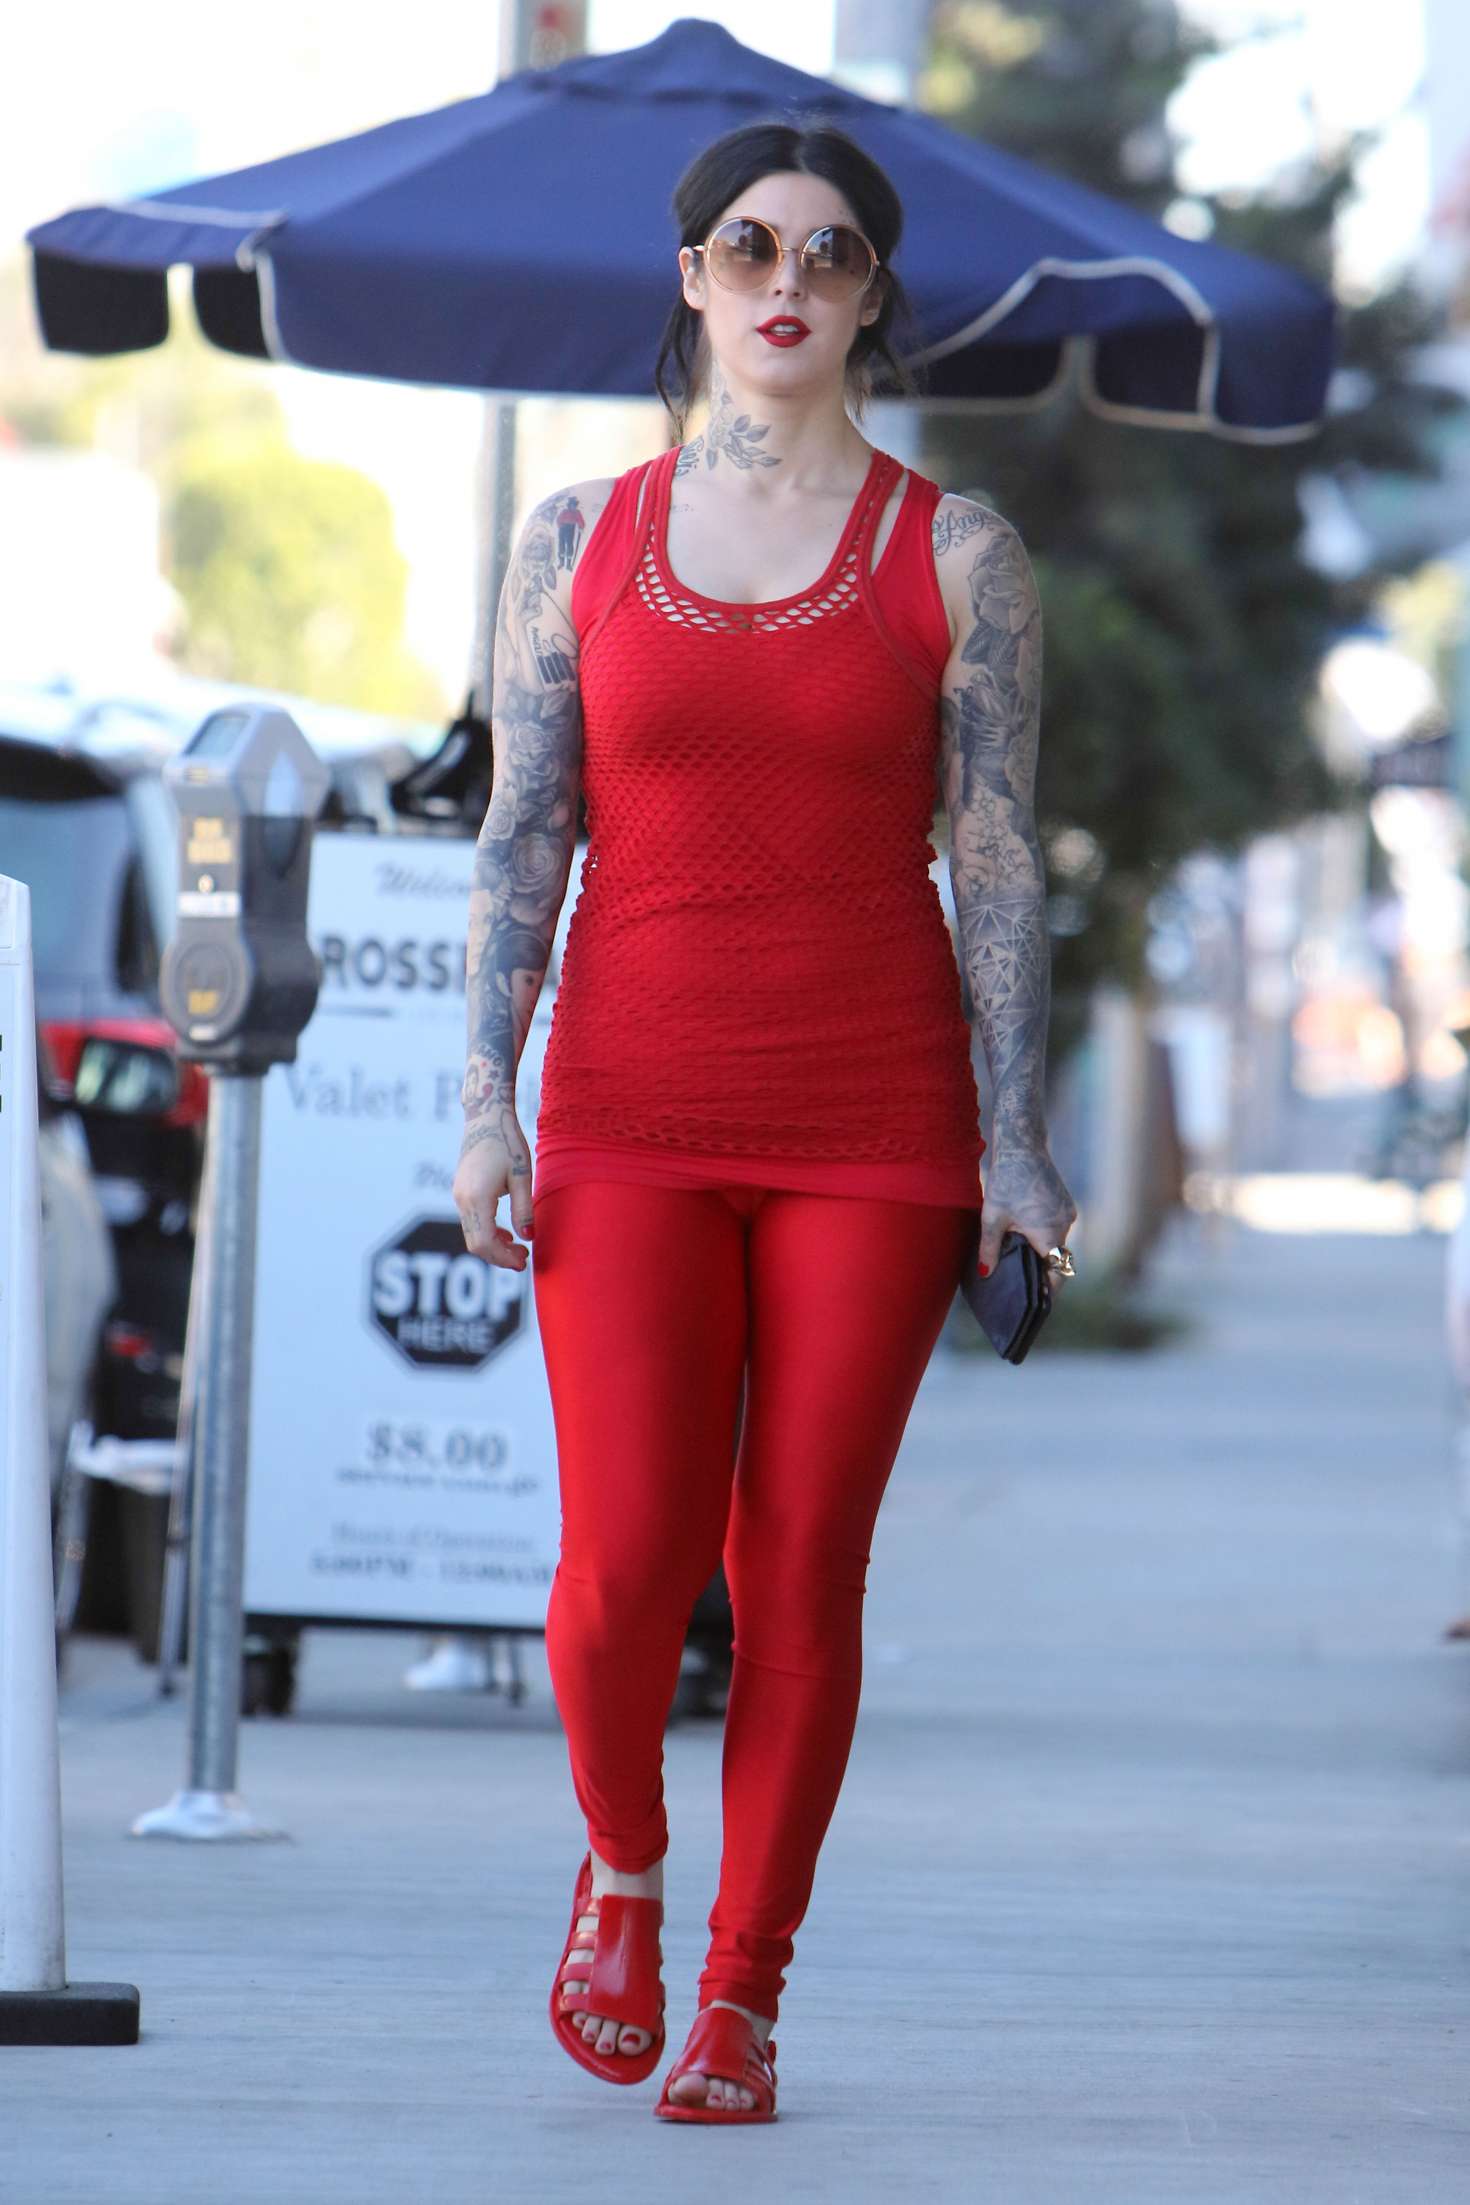 Kat Von D in red outfit out in West Hollywood. 